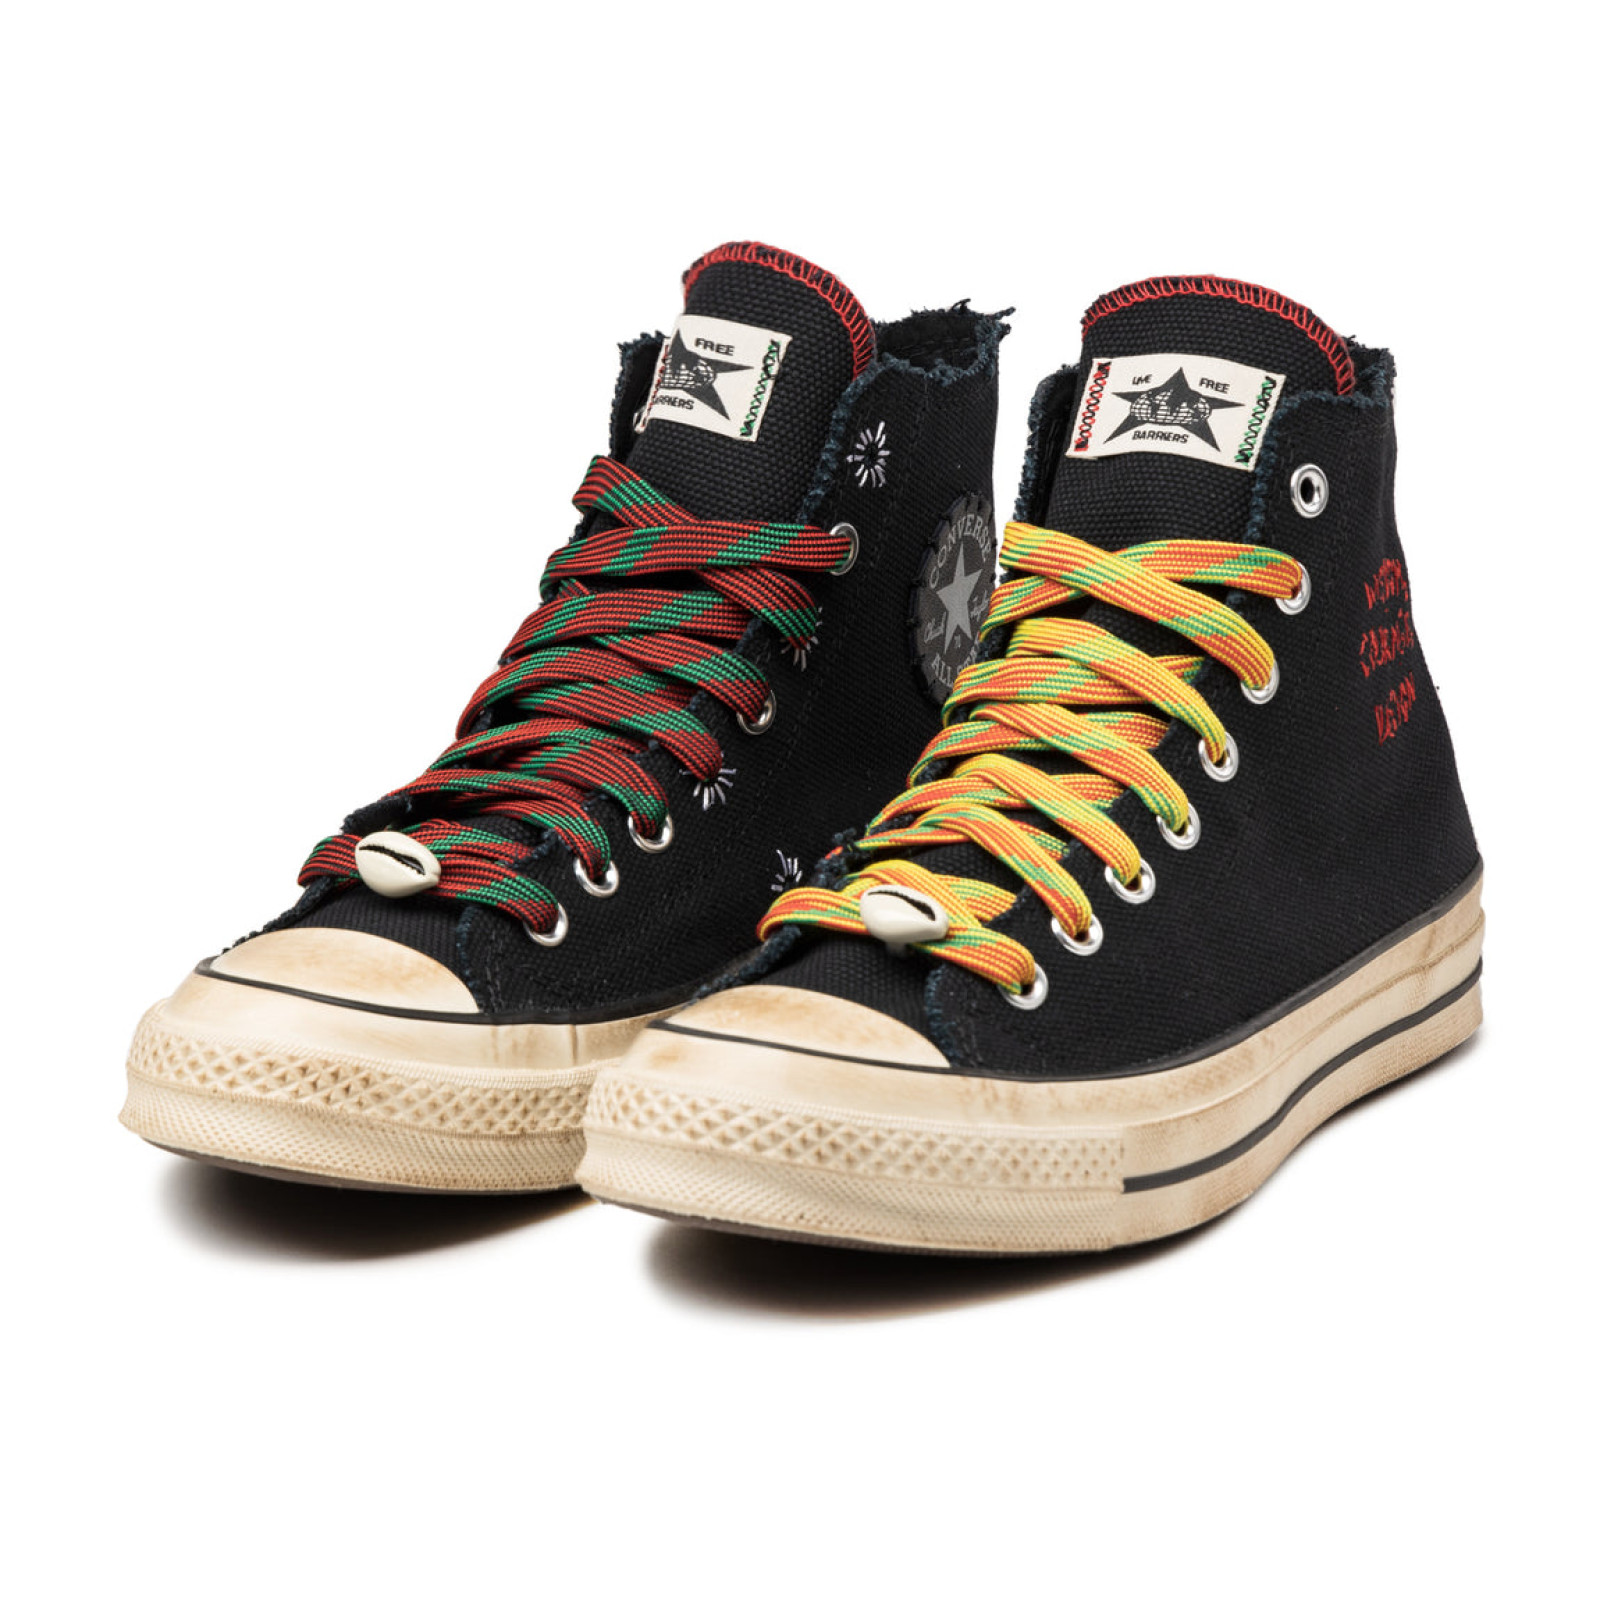 Converse x Barriers
Chuck Taylor All Star 70 Hi
Black / Red